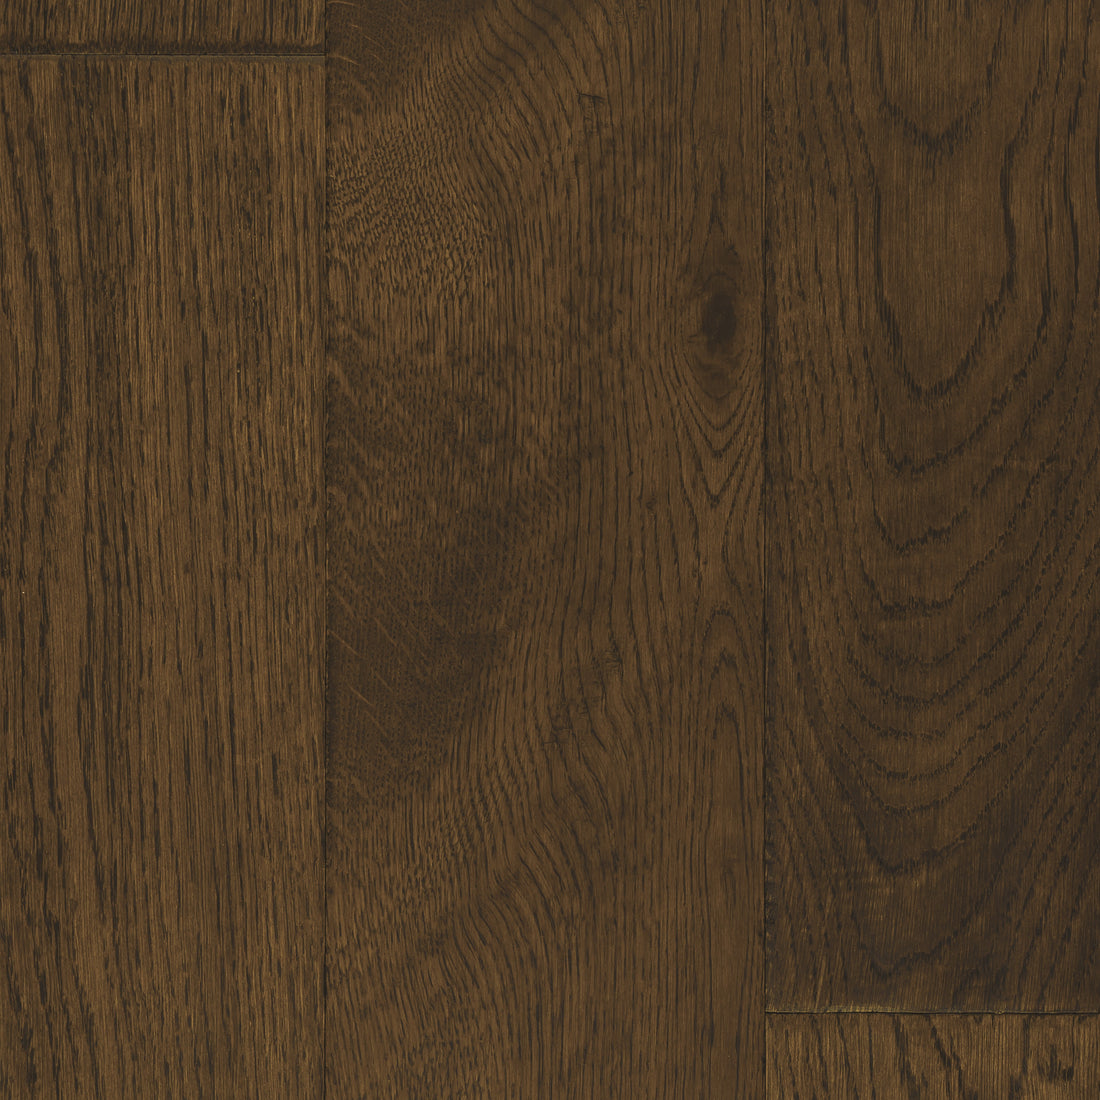 Tuscan Forte Toffee Oak Hand Scraped Lacquered TF516